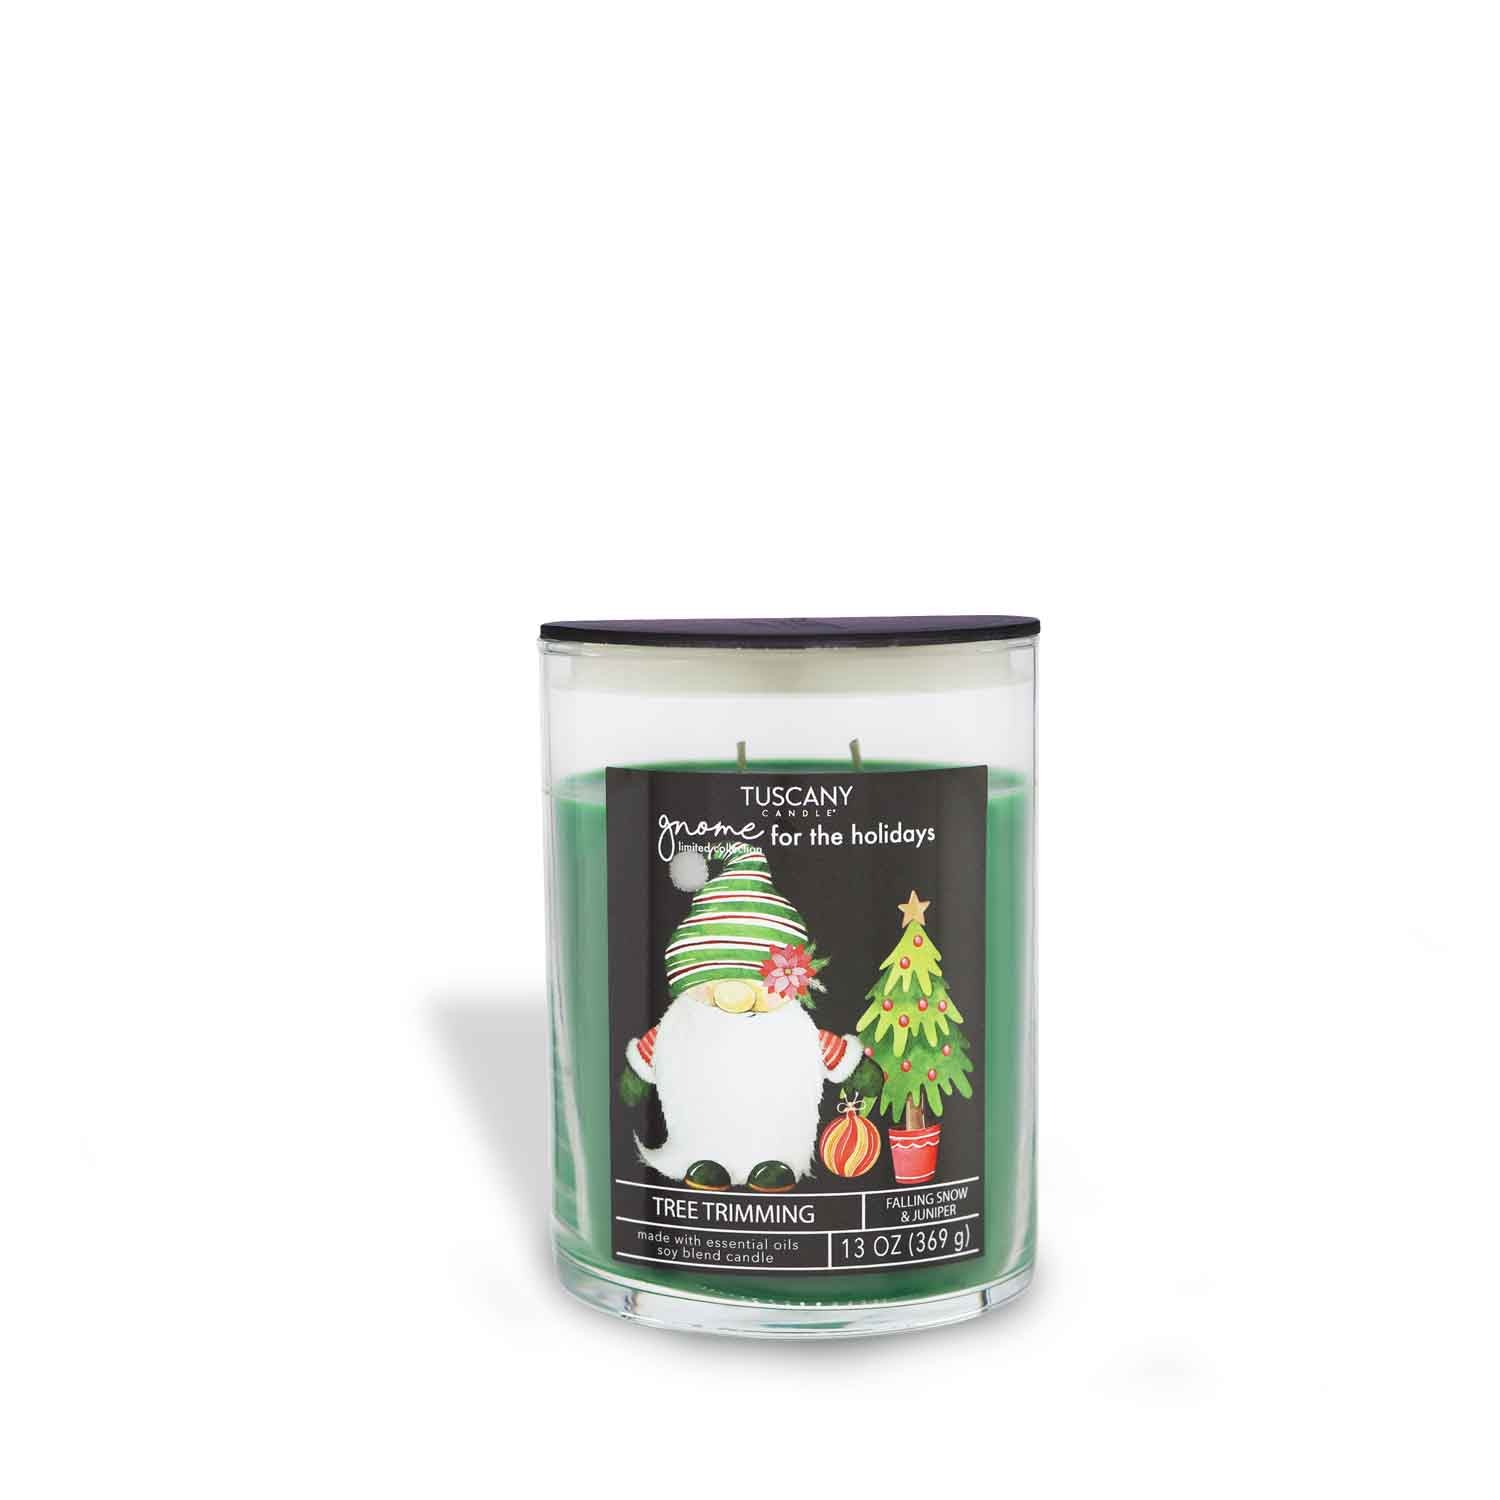 Tree Trimming candle from the Gnome for the Holidays collection, boasting vibrant green wax and a merry gnome-packed label, gleaming merrily against a snowy white background